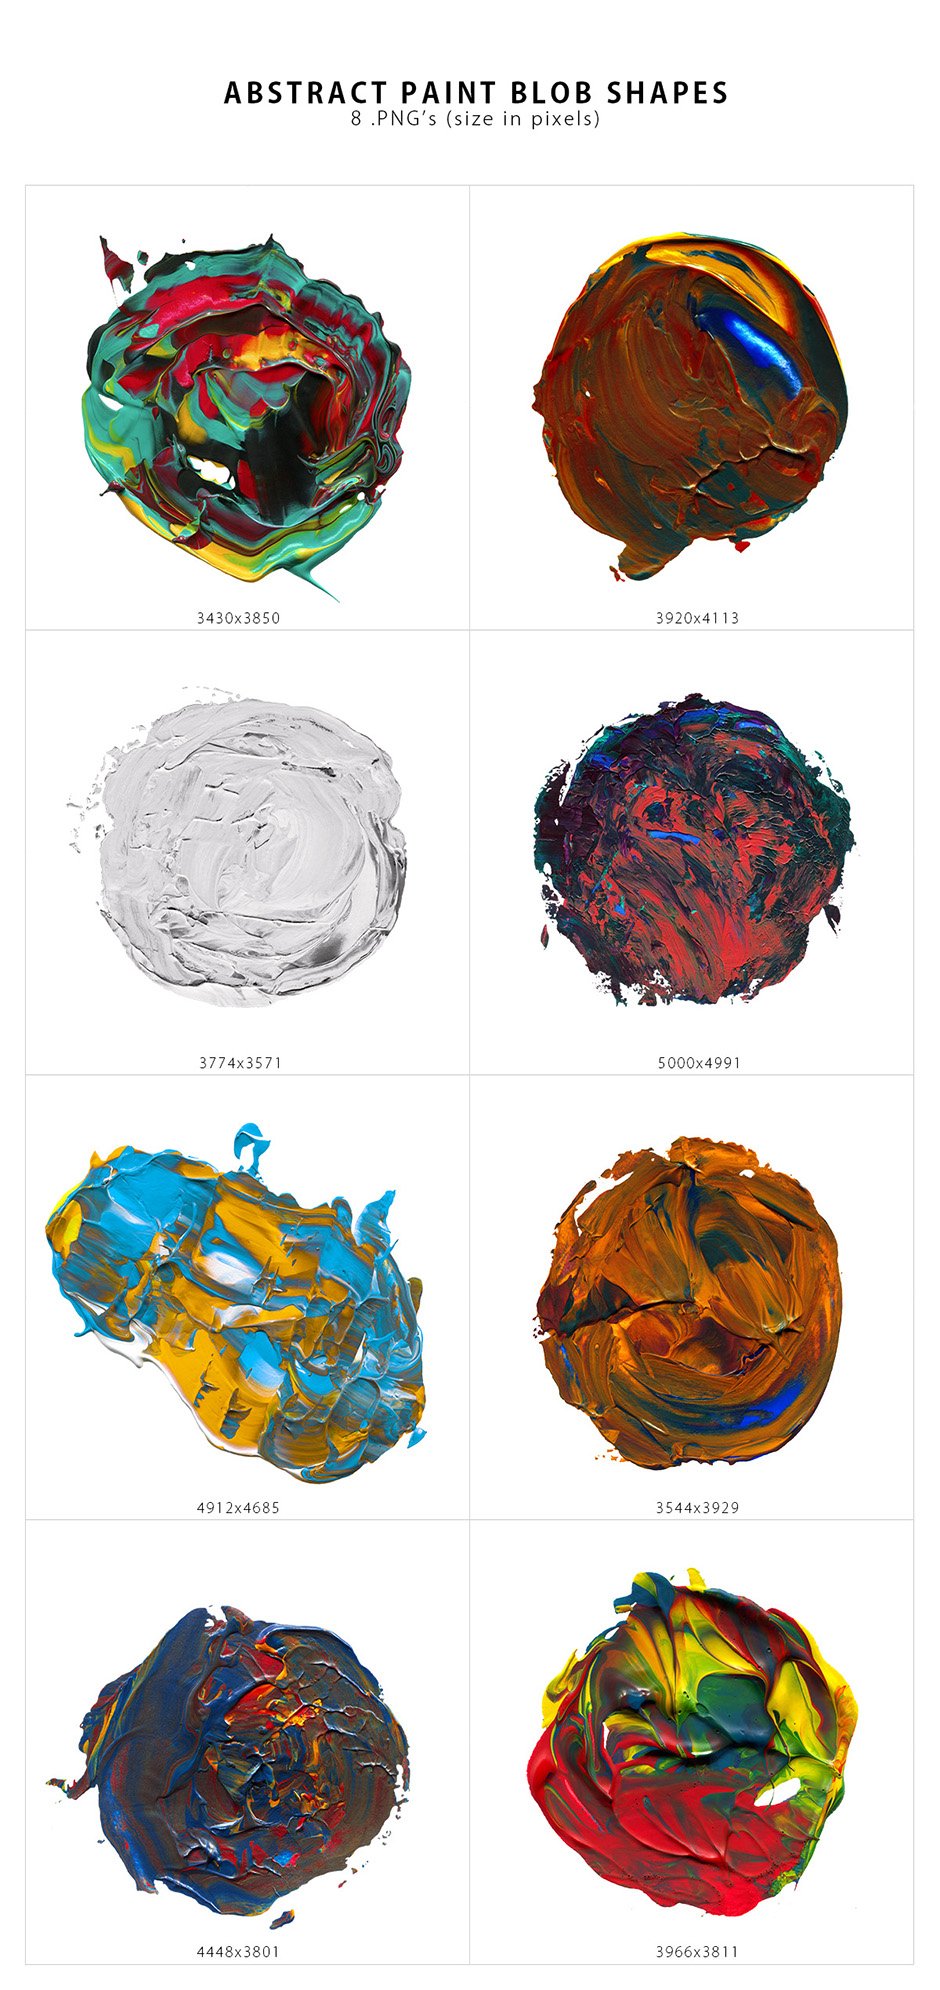 Abstract Paint Shapes prev2